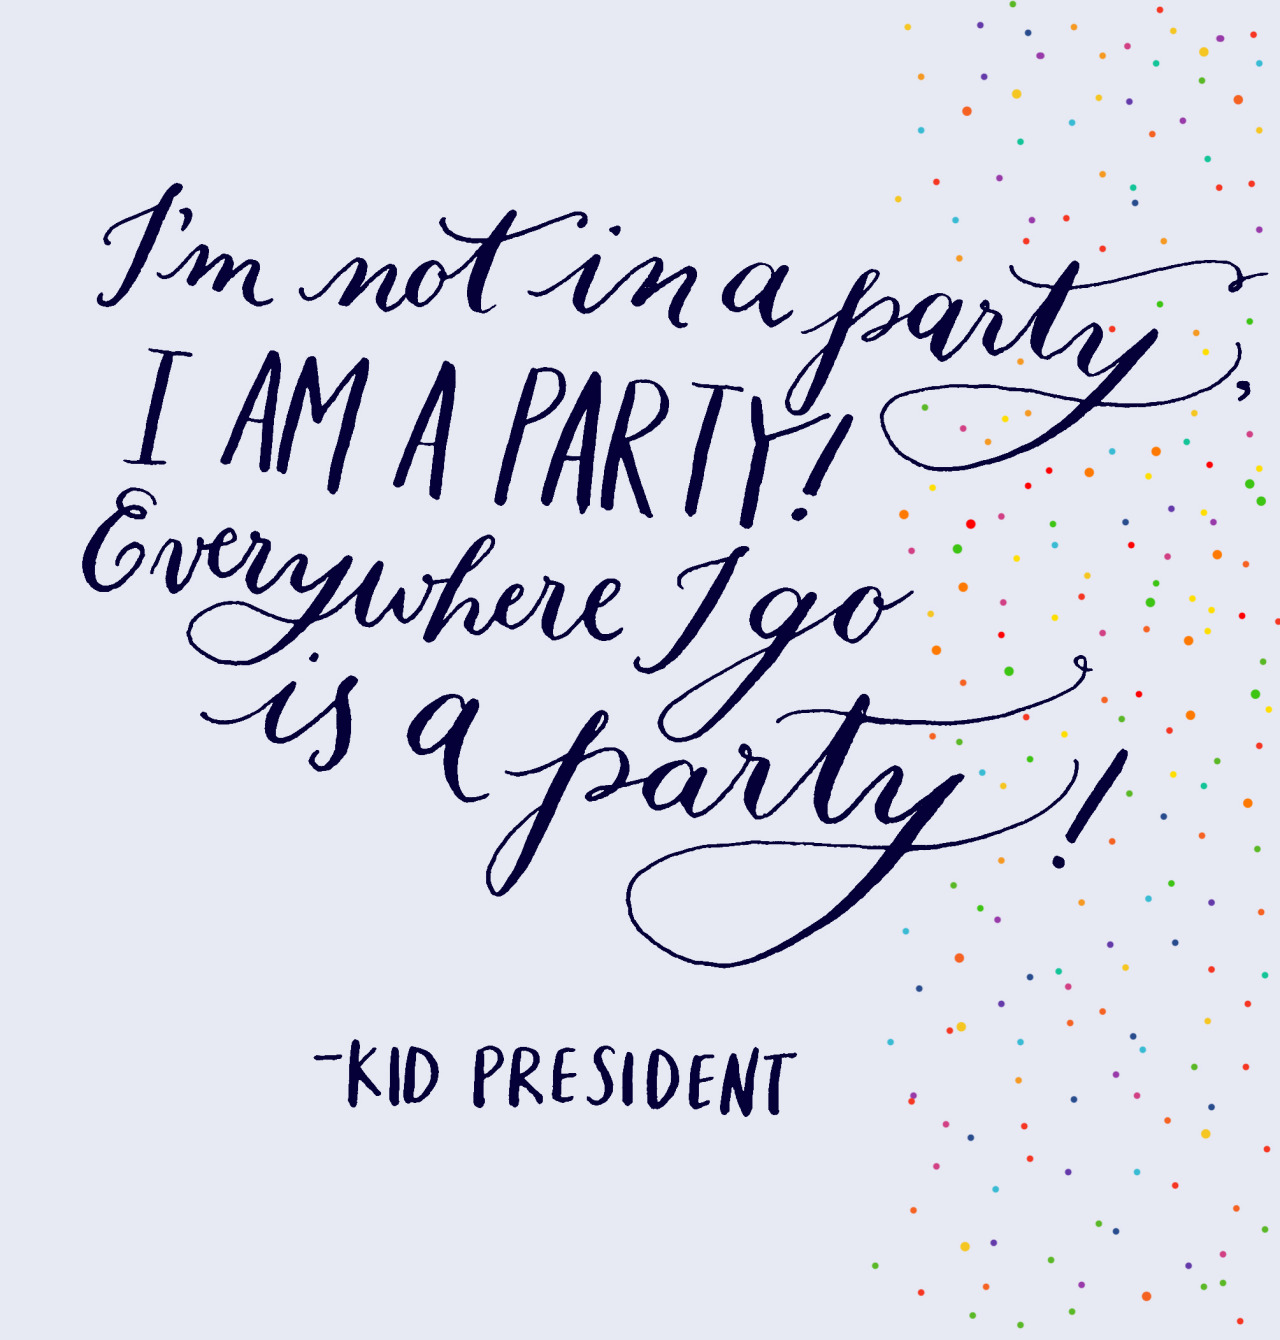 2013yearoflettering:</p>
<p>Day 36: “I’m not in a party, I am a party! Everywhere I go is a party!” - Kid President<br />
